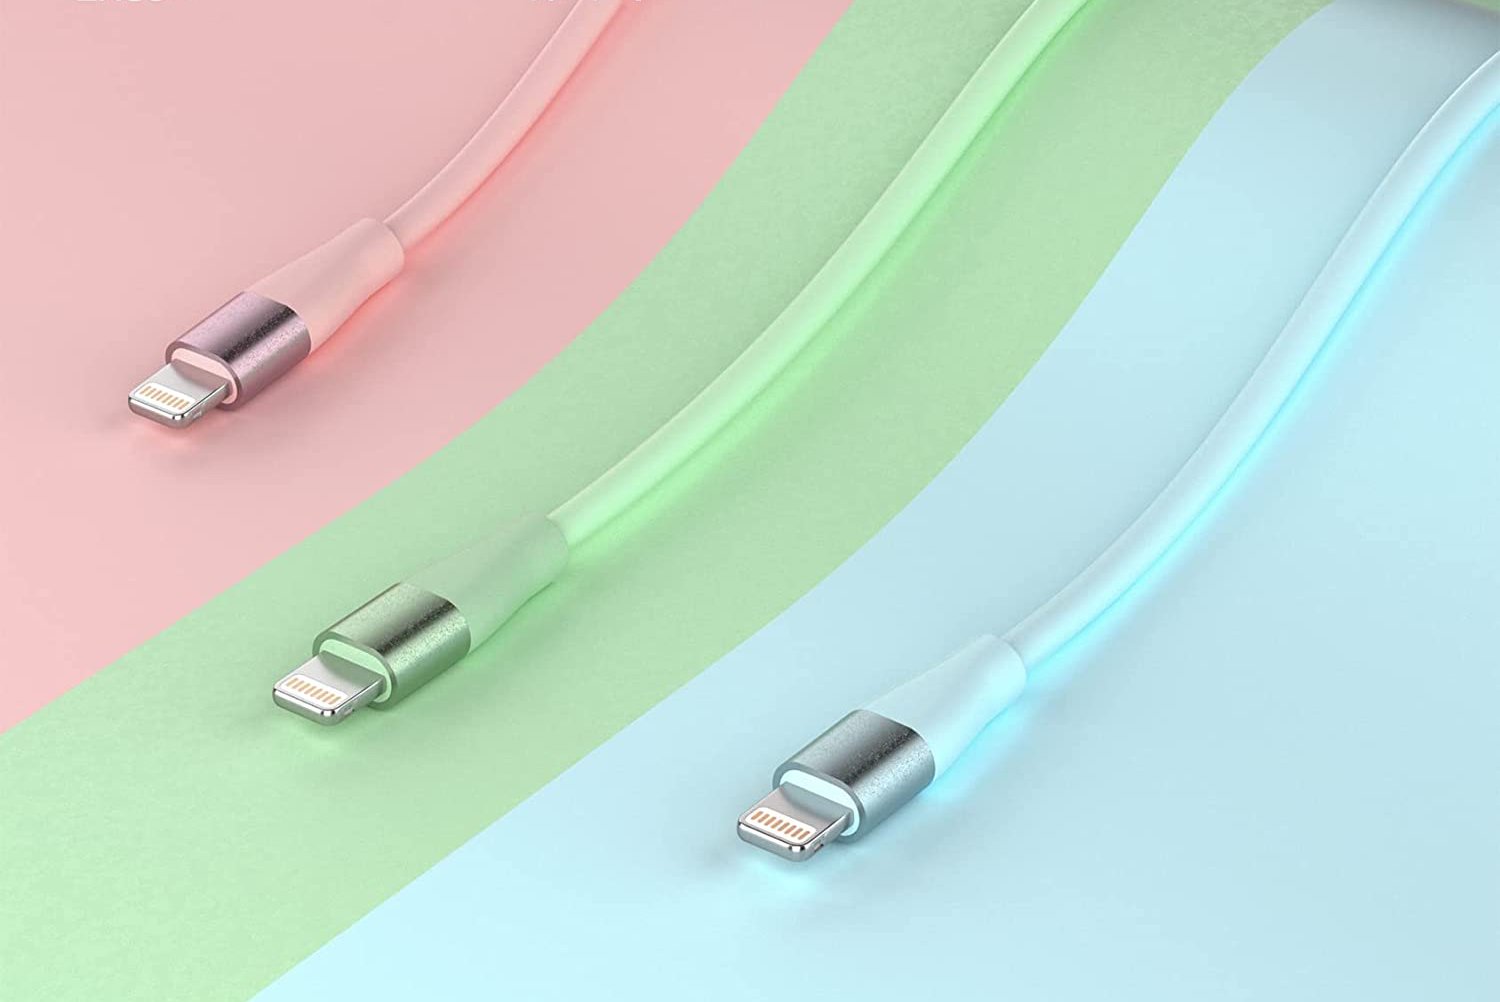 MenoSupp iPhone Lightning Cable